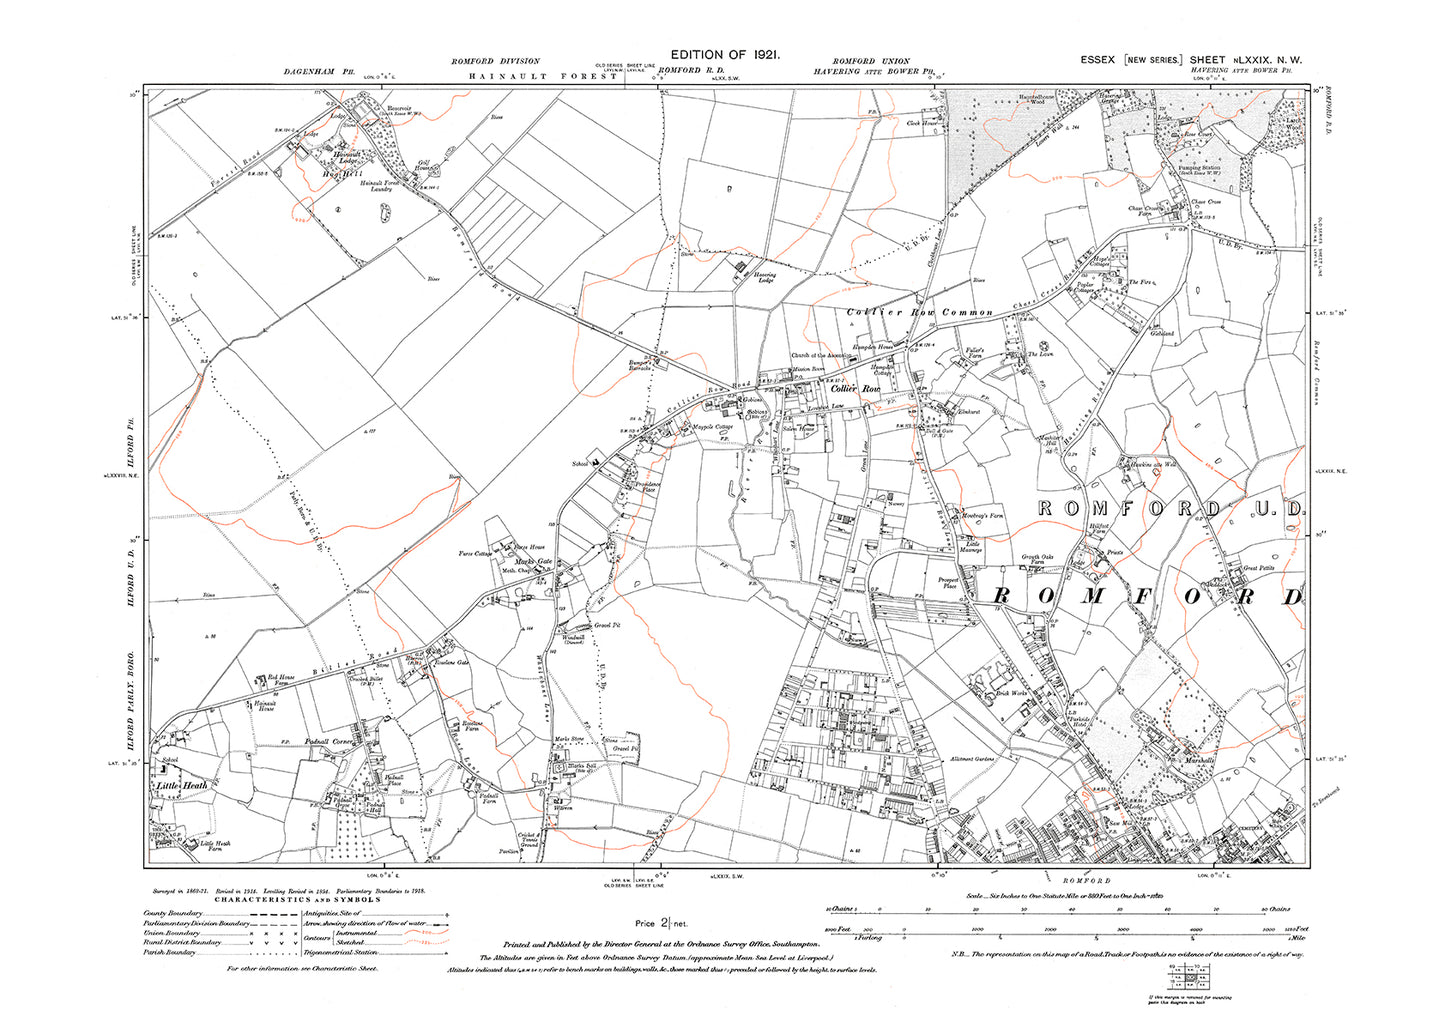 Old OS map dated 1921, showing Romford (northwest) and Collier Row in Essex - 79NW